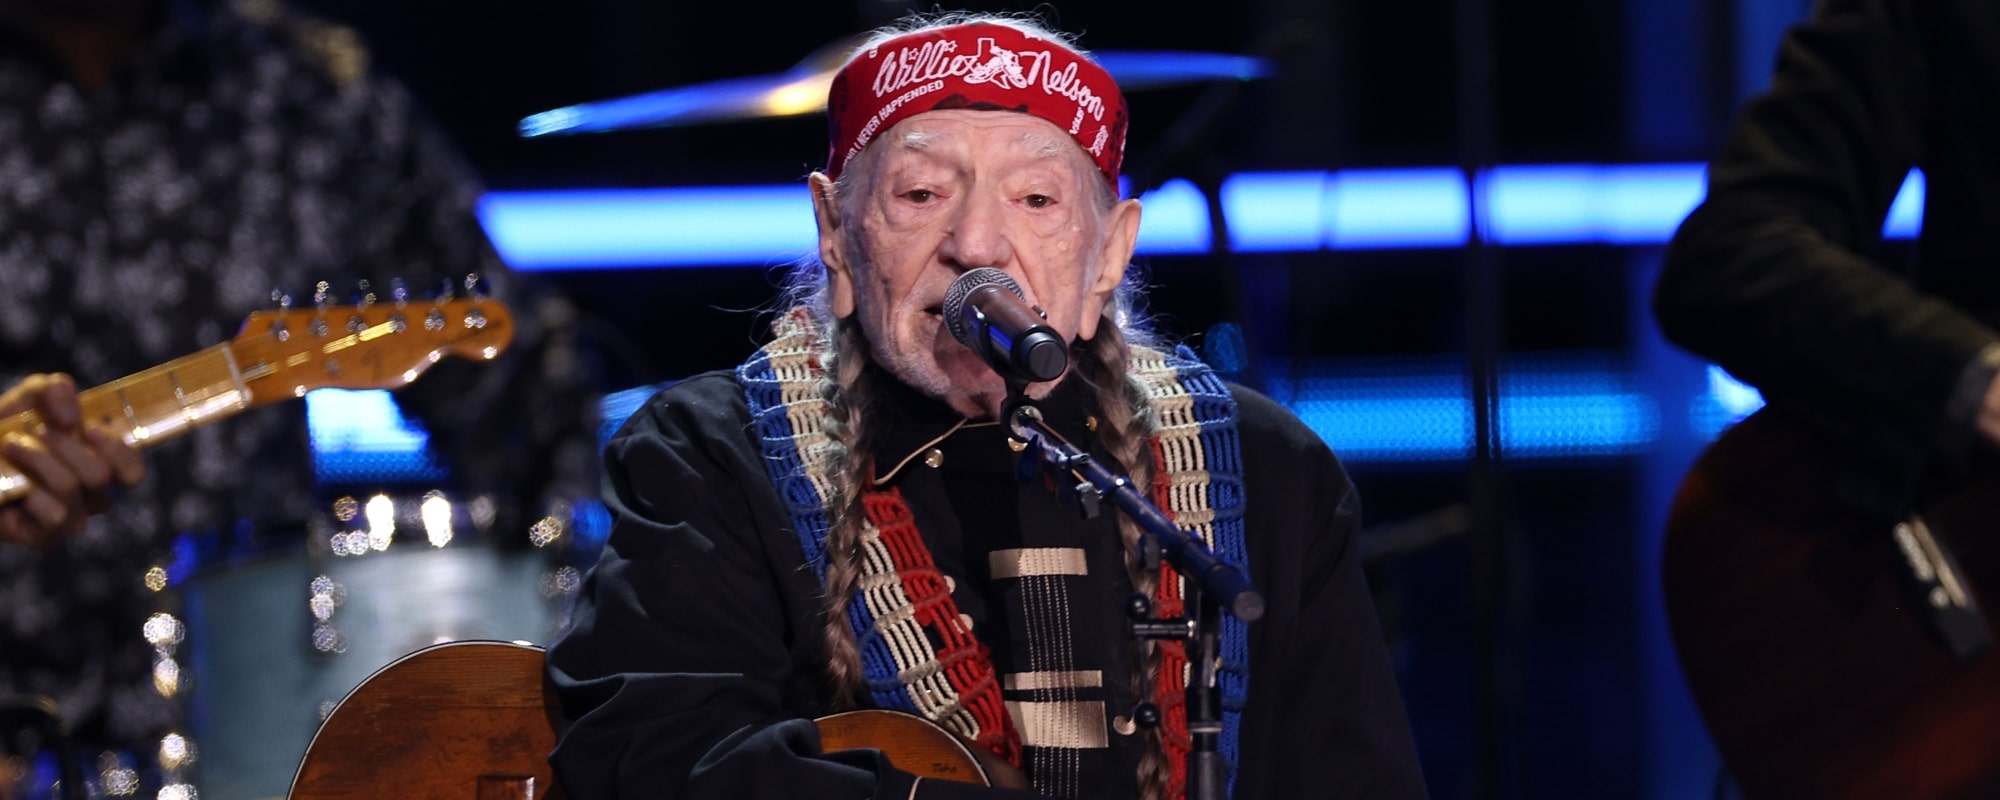 Watch Willie Nelson and Billy Strings Perform “California Sober” During Nelson’s 90th Birthday Celebration